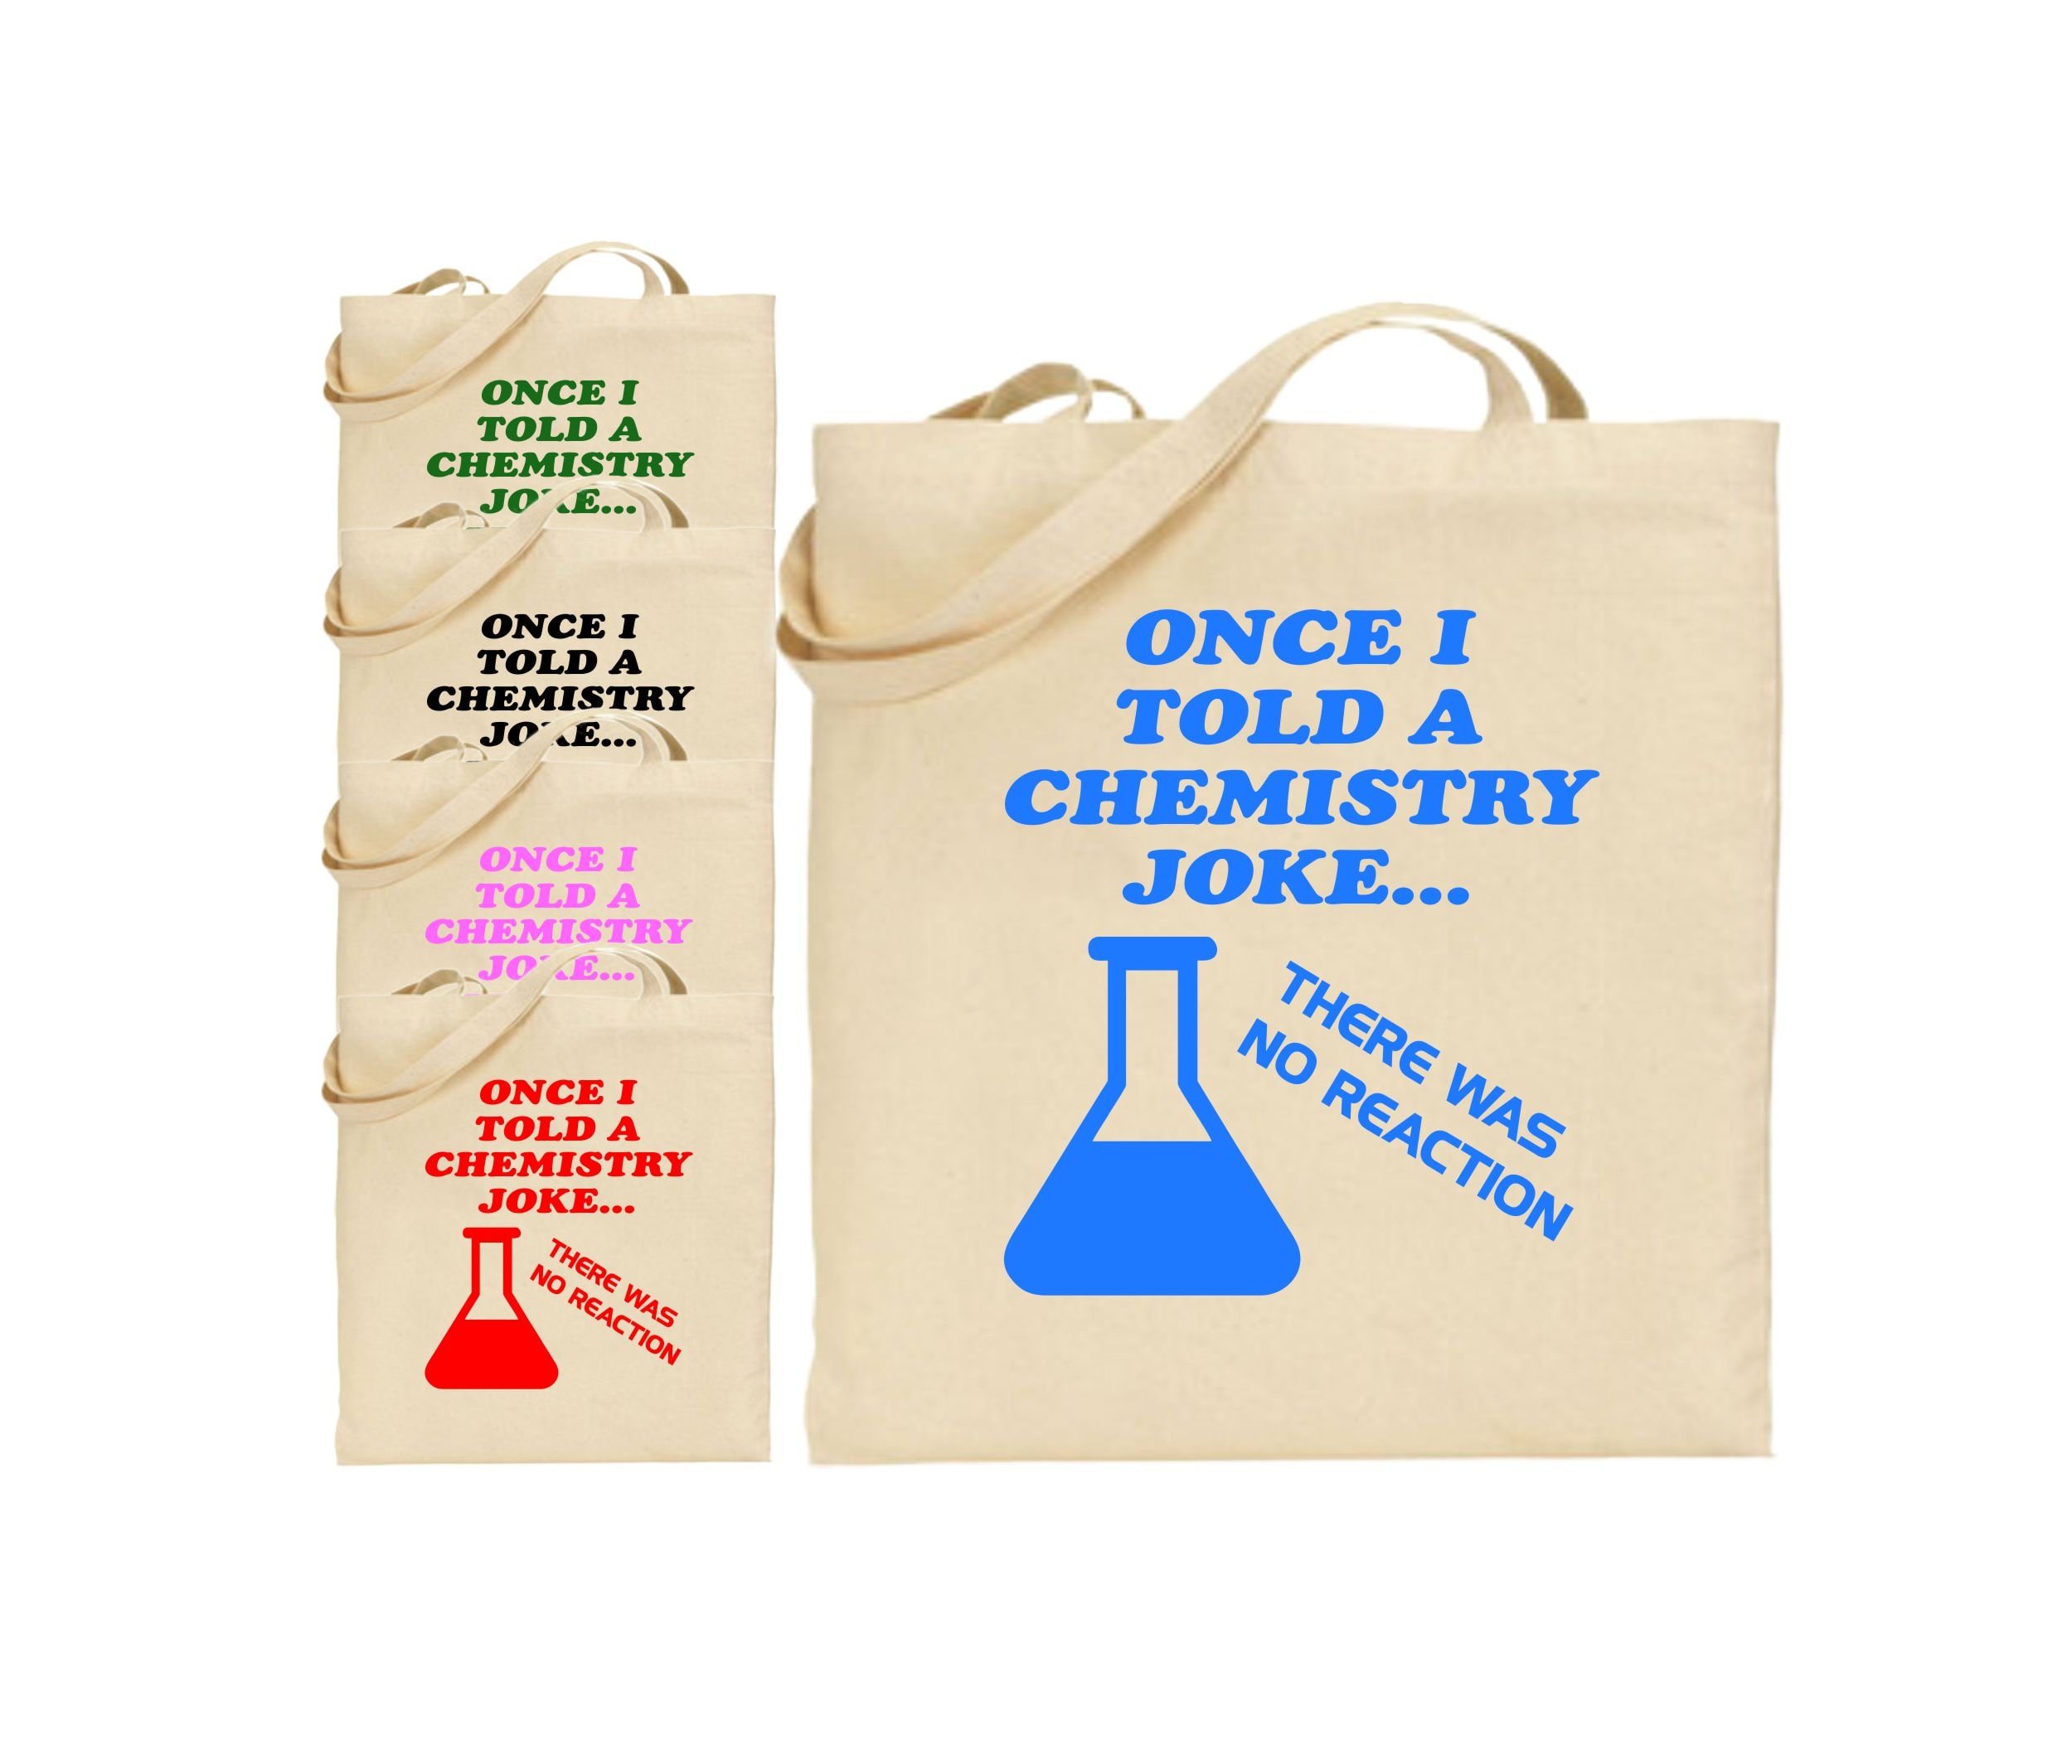 Cation cat chemistry joke Science Humour Comics Gift Cotton Shopping Tote Bag 